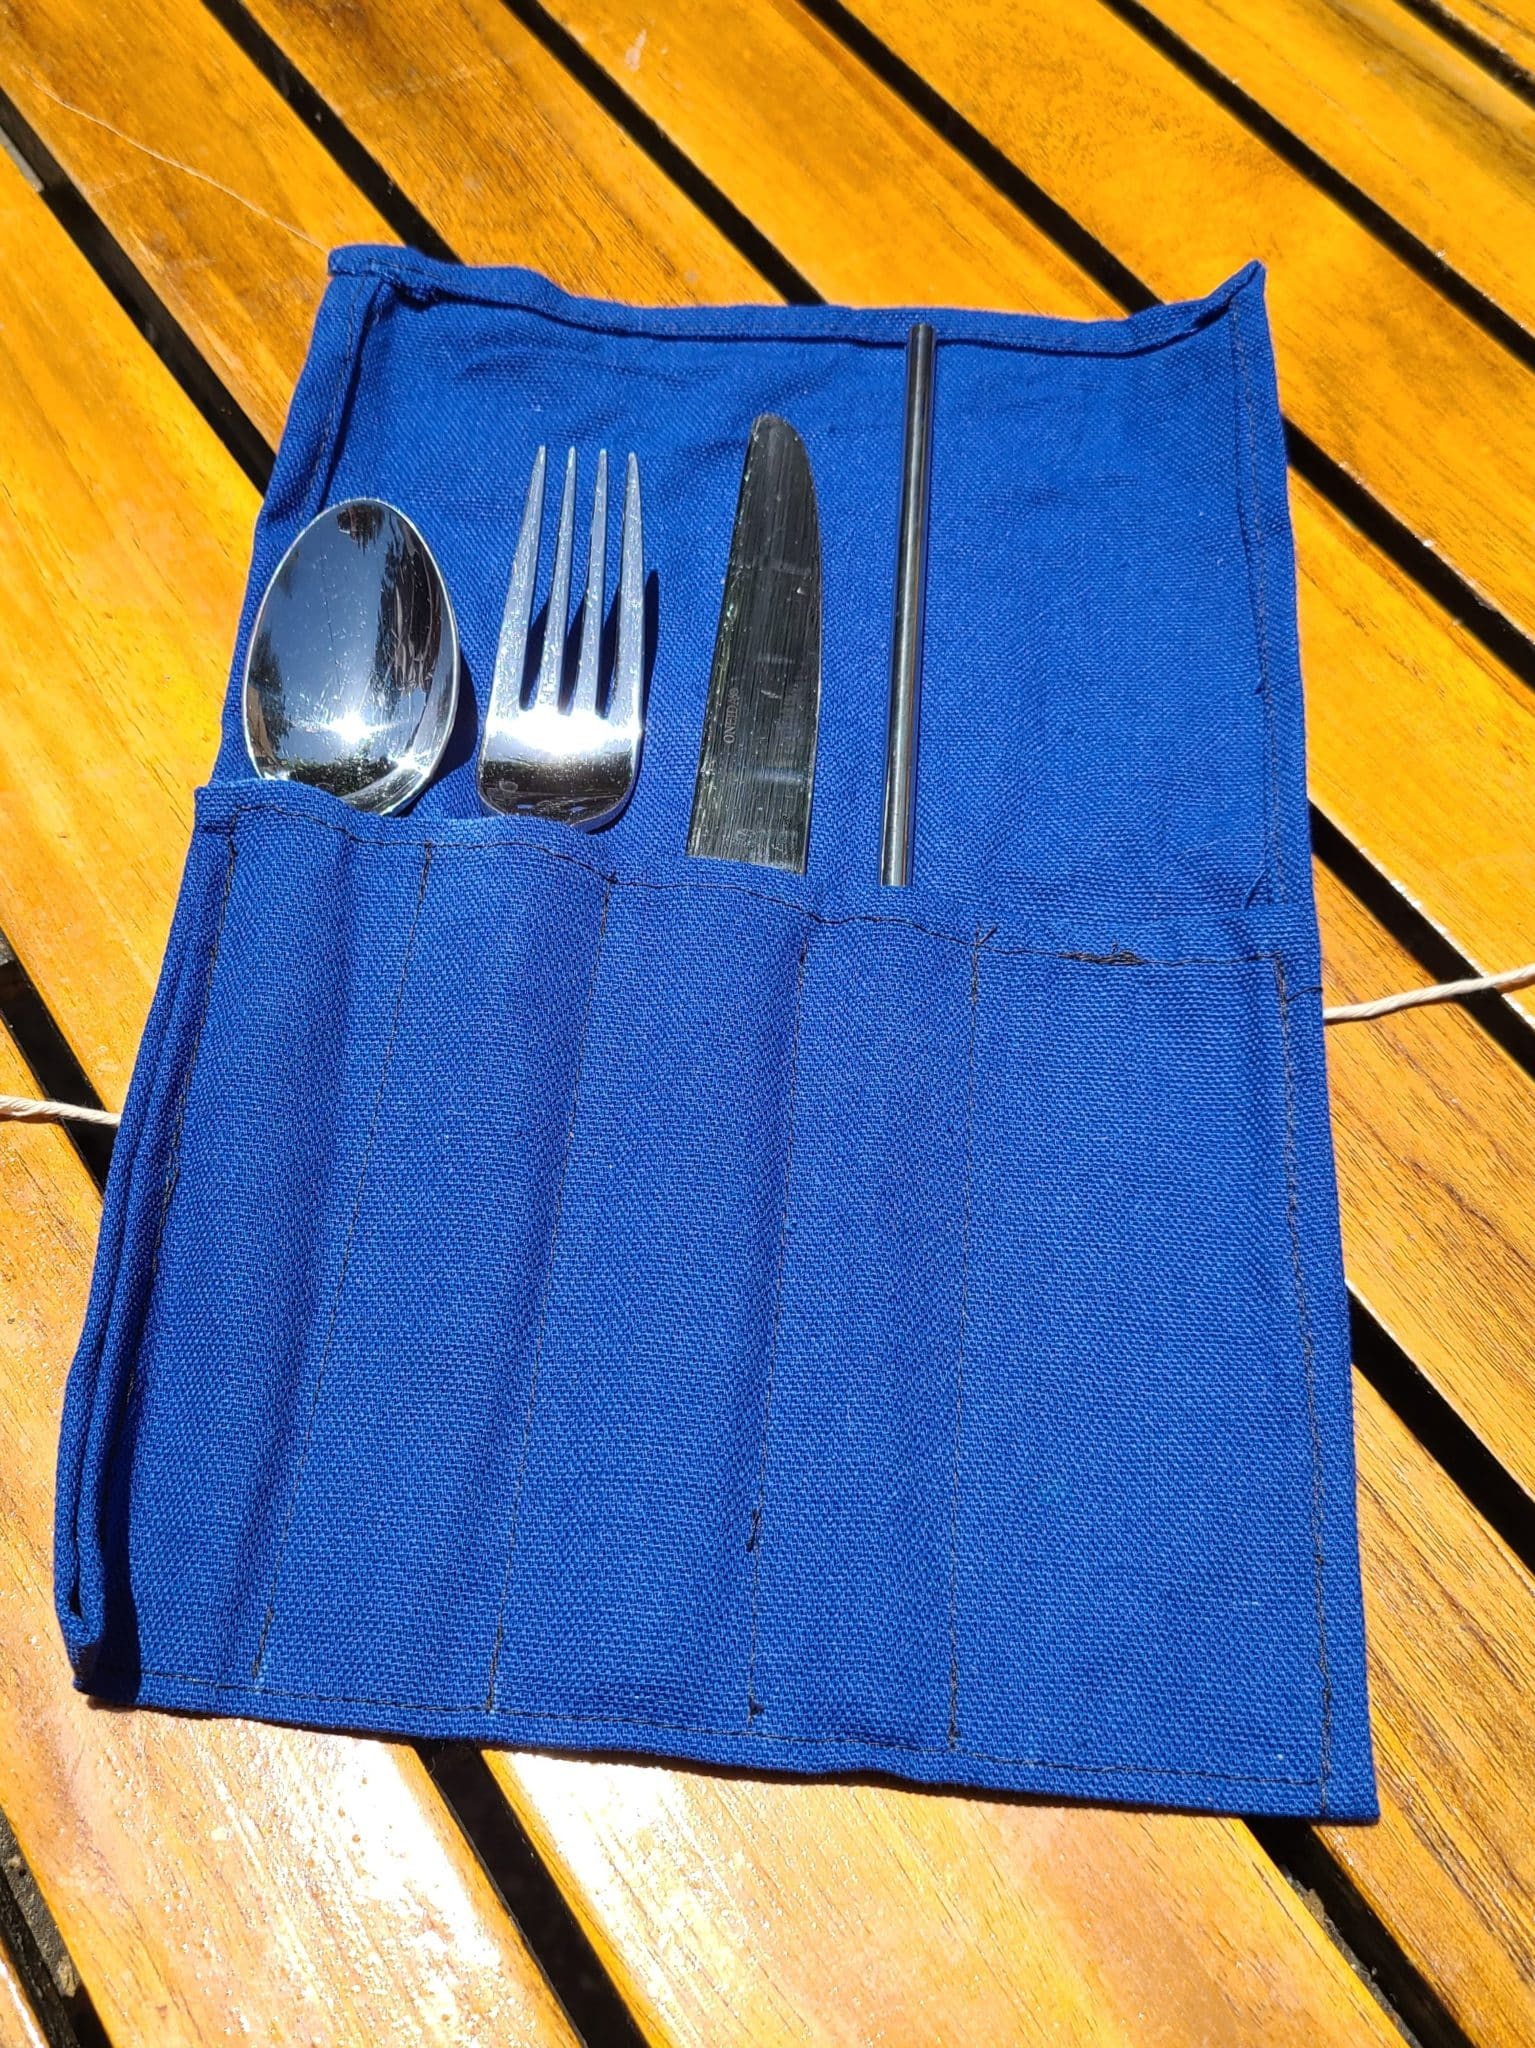 Eco-friendly travel tips for families - a set of your own utensils lying on table in a homemade blue carrying pack.